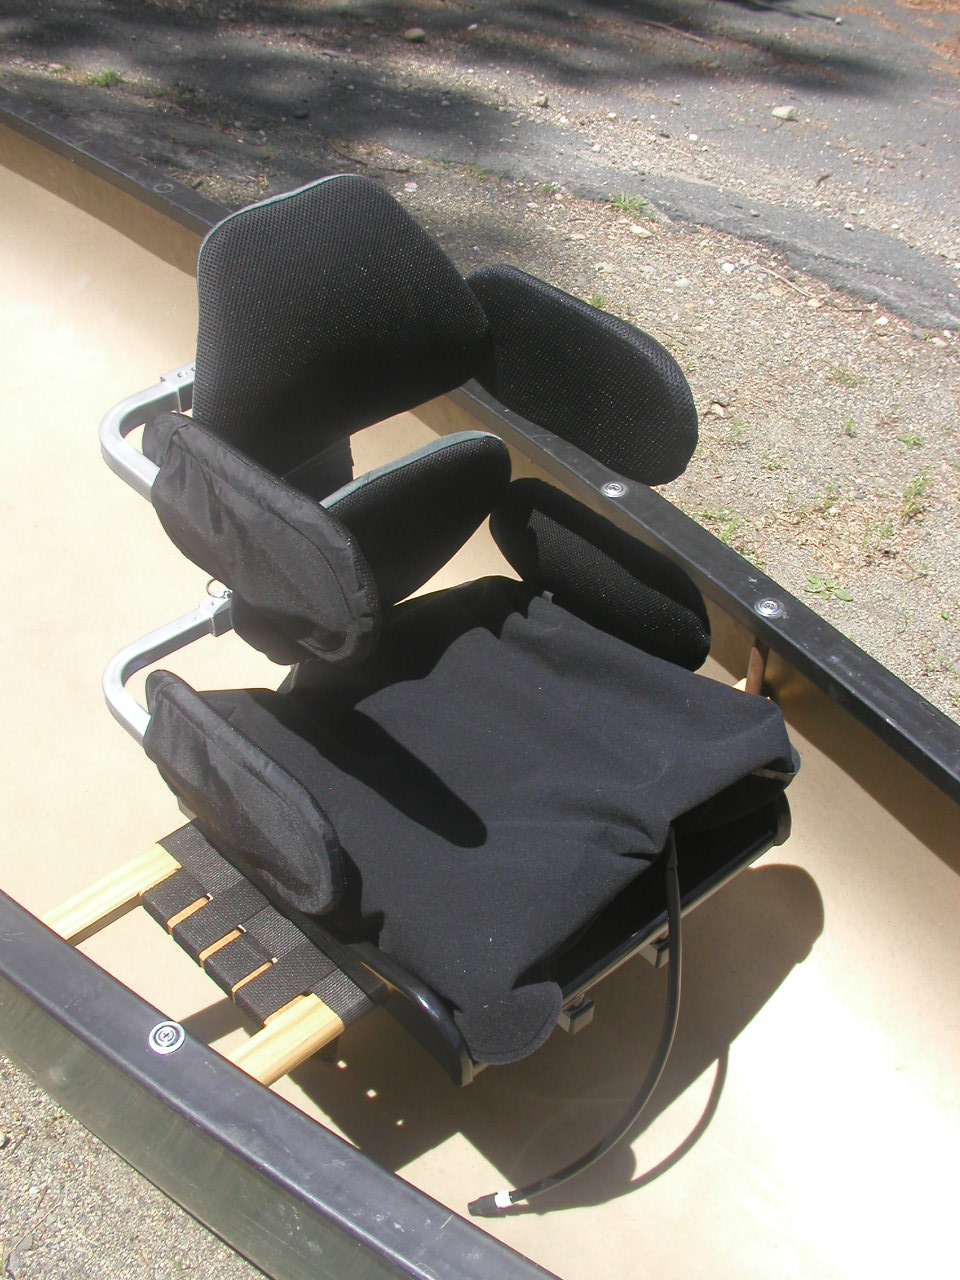 A seat mounted in a canoe. The seat has a trapezoidal pad at the lower back and another at upper back height. Two lateral support pads are located at the same height as each of the back pads, with four side pads total. There is a cushion in the bottom of the seat.